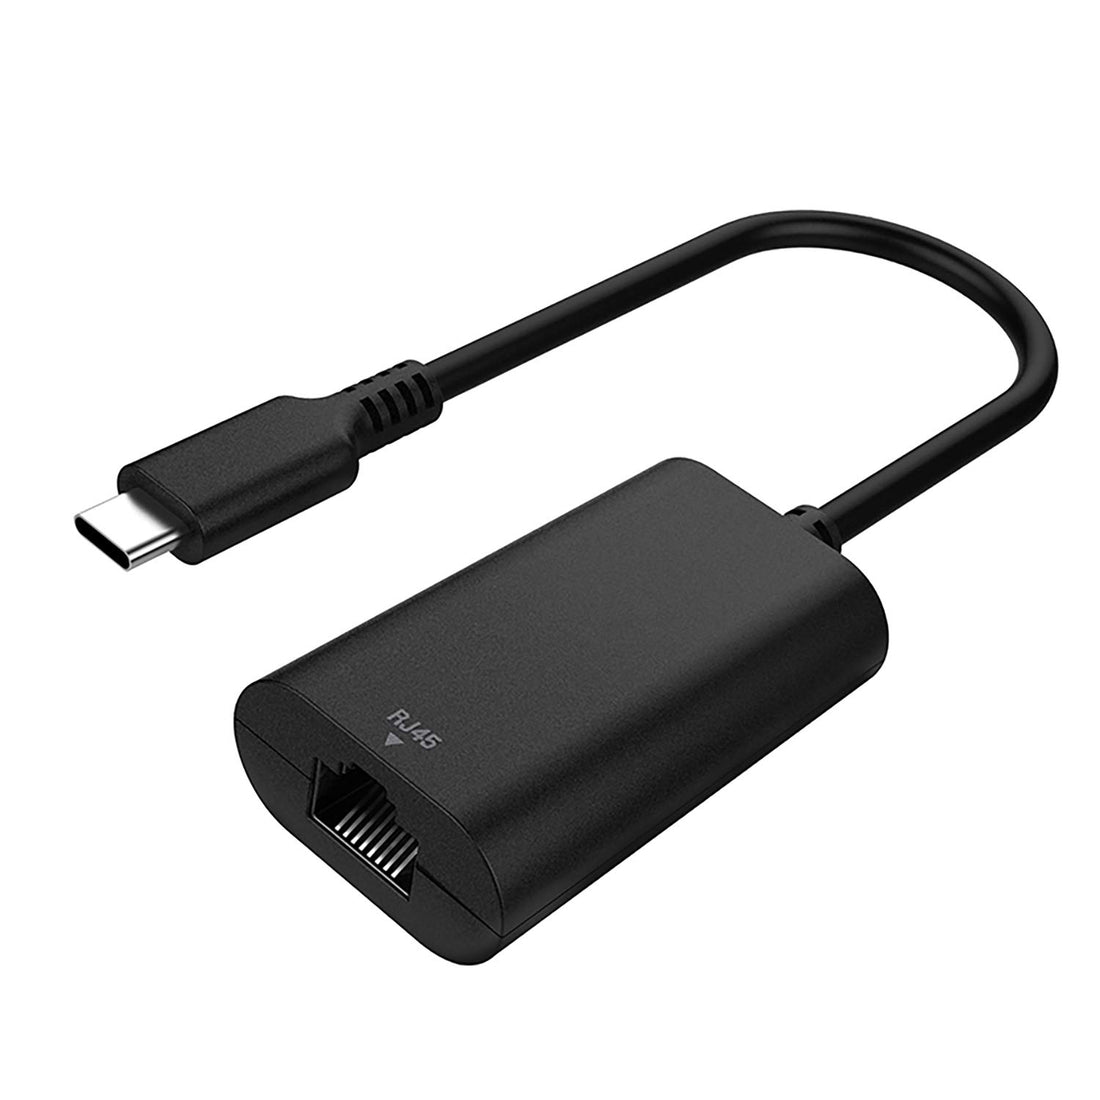 Philips Accessories USB-C to Ethernet Adapter, Type C Connector, Connect to 1GB Networks, Supports 10/100/1000 Mbps, Works with Windows 7+ and Mac, Black, Compact Portable Design, SWV2851N/27